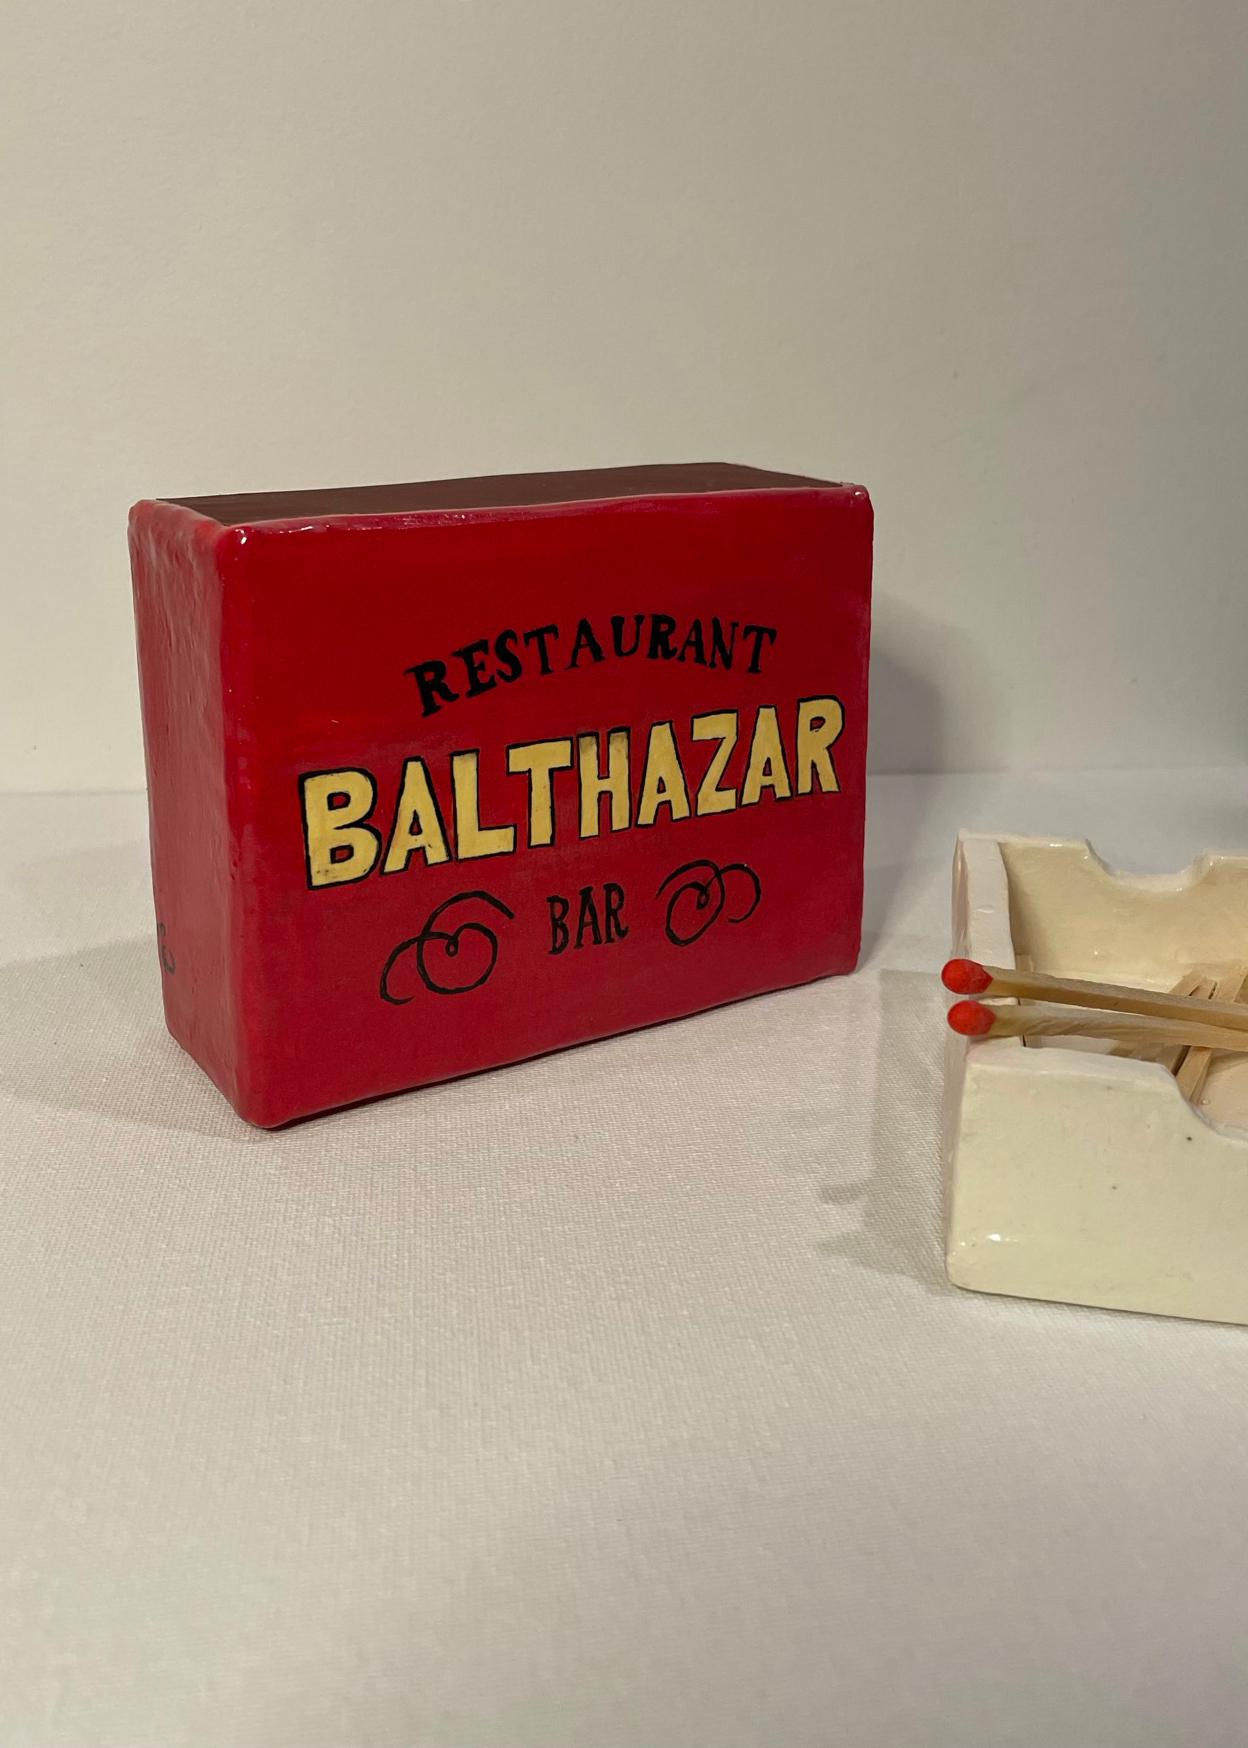 The Matchbox Series is composed of roughly 3”x 5” to 5” x 7” boxes that make direct references to iconic culinary institutions. These boxes come with slide out inserts that are filled with oversized matches, roughly 20-30 per order. There is also a